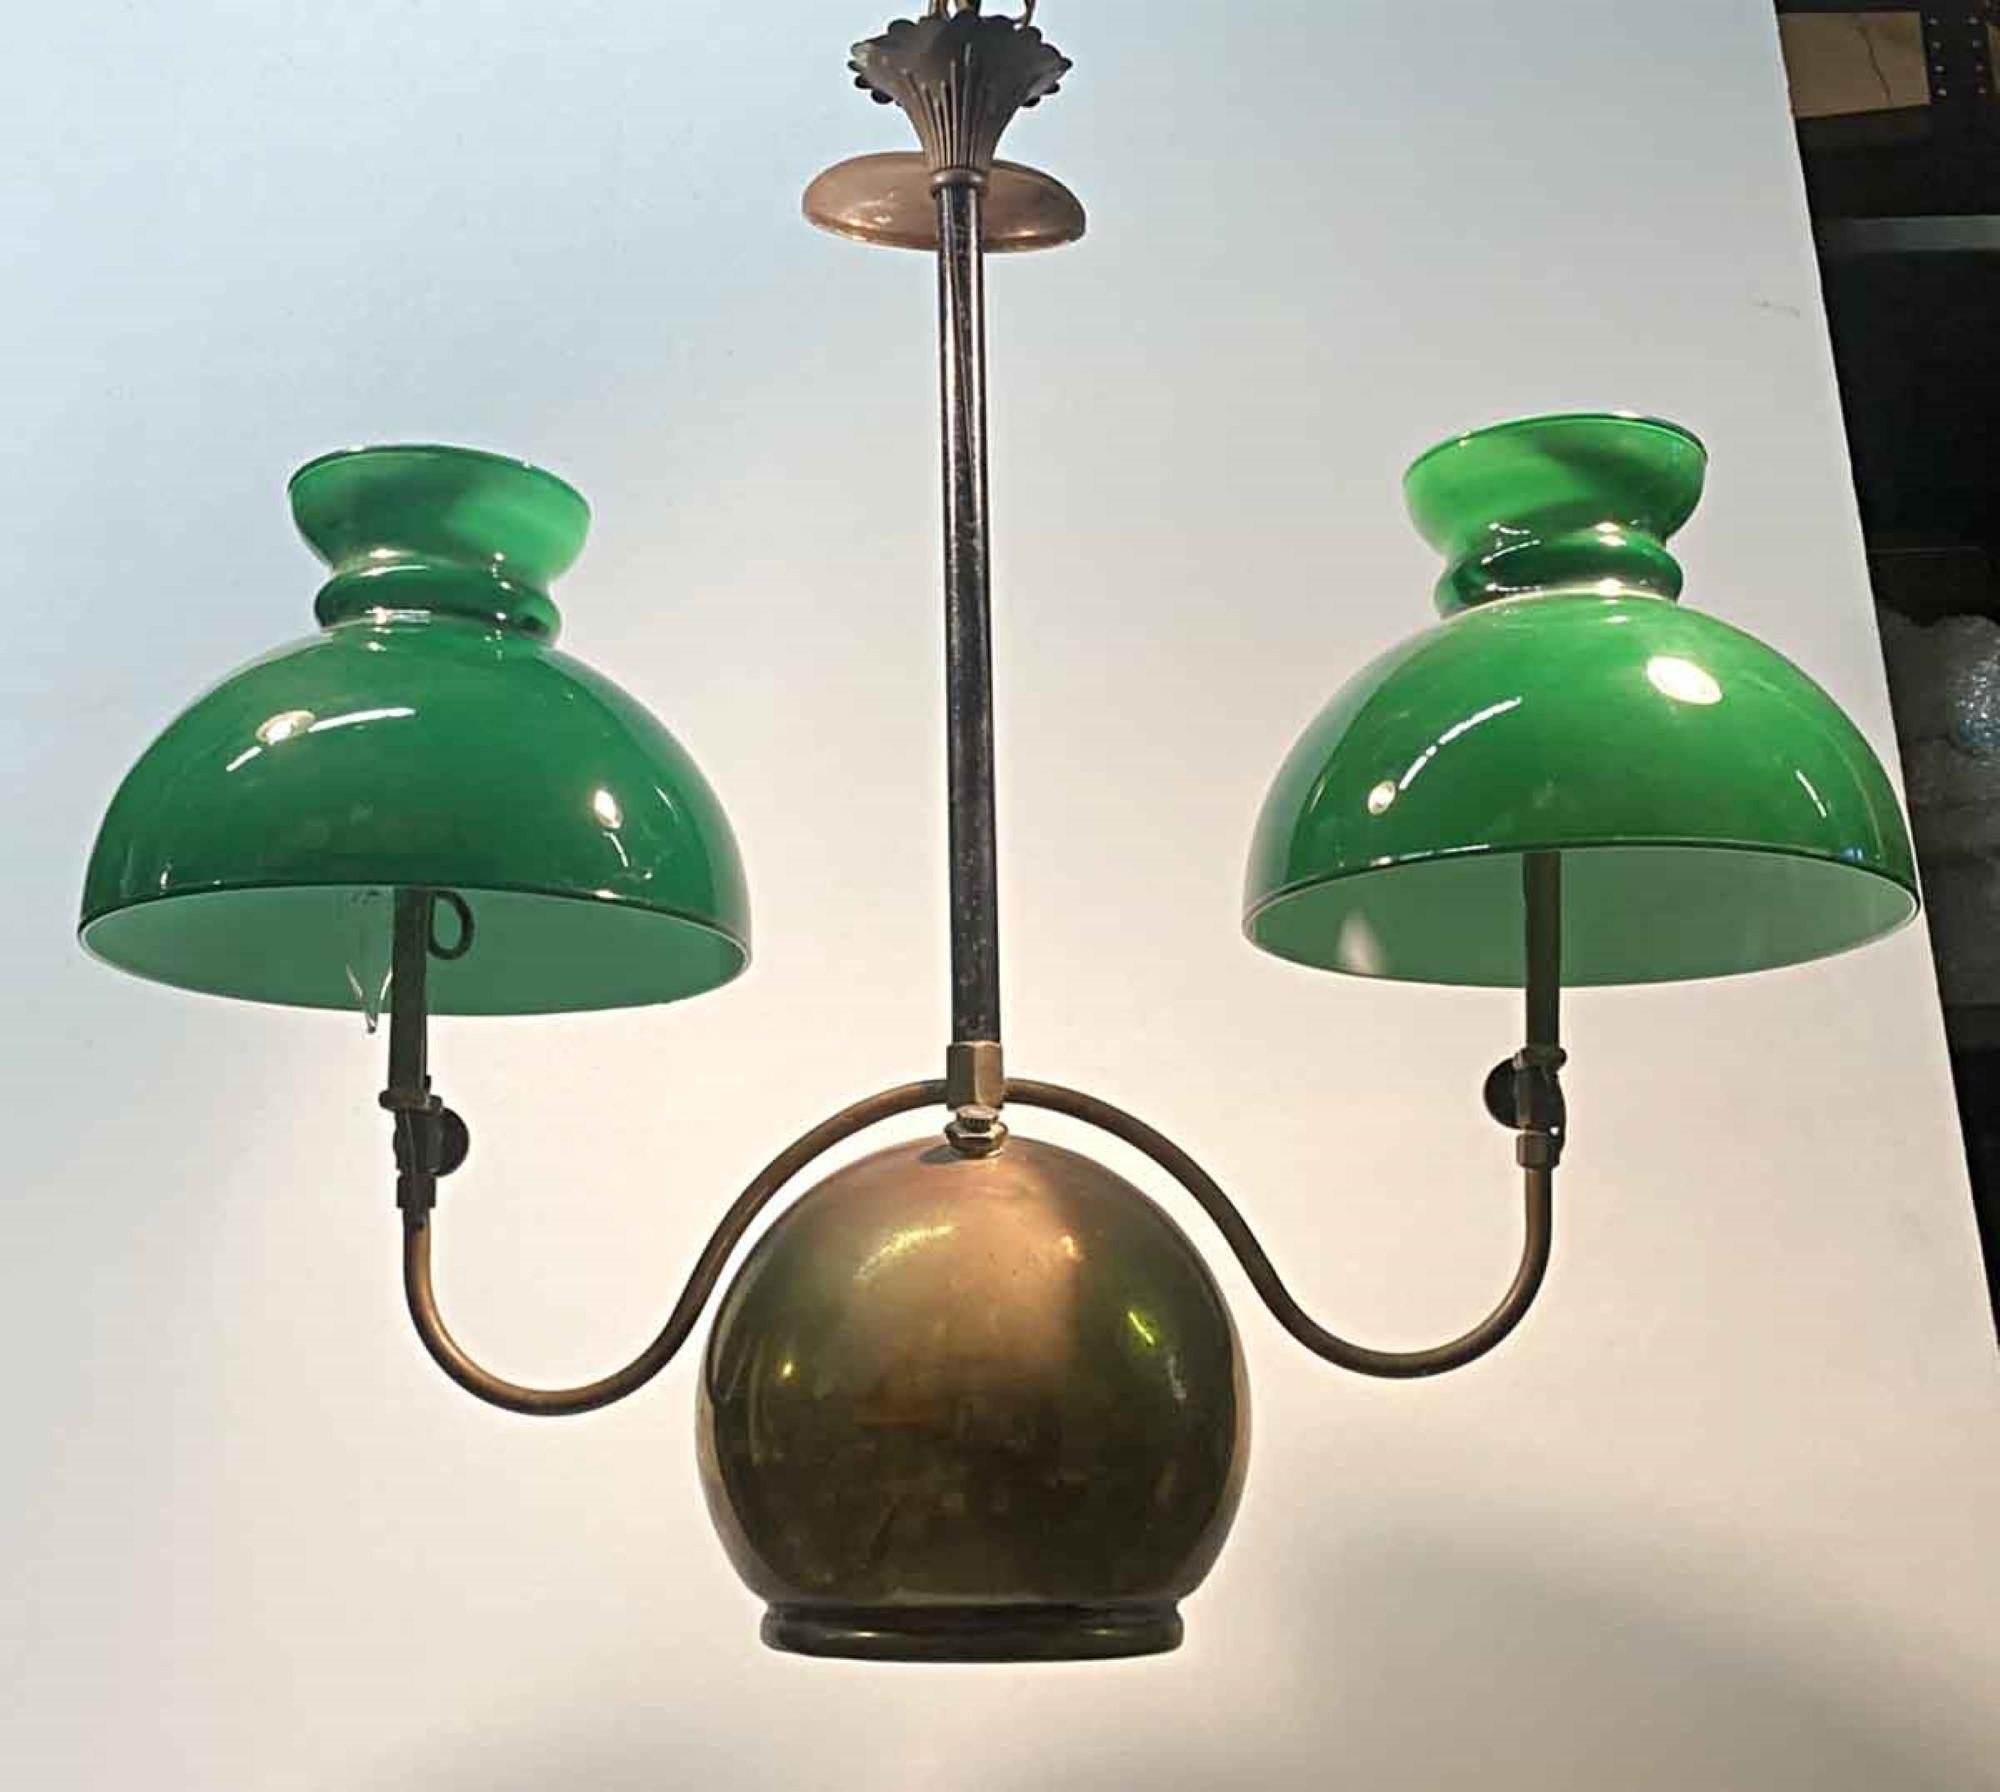 1880s double light whale oil lantern with the original deep patina. Features two green glass shades. Converted to electric. This can be seen at our 400 Gilligan St location in Scranton. PA.